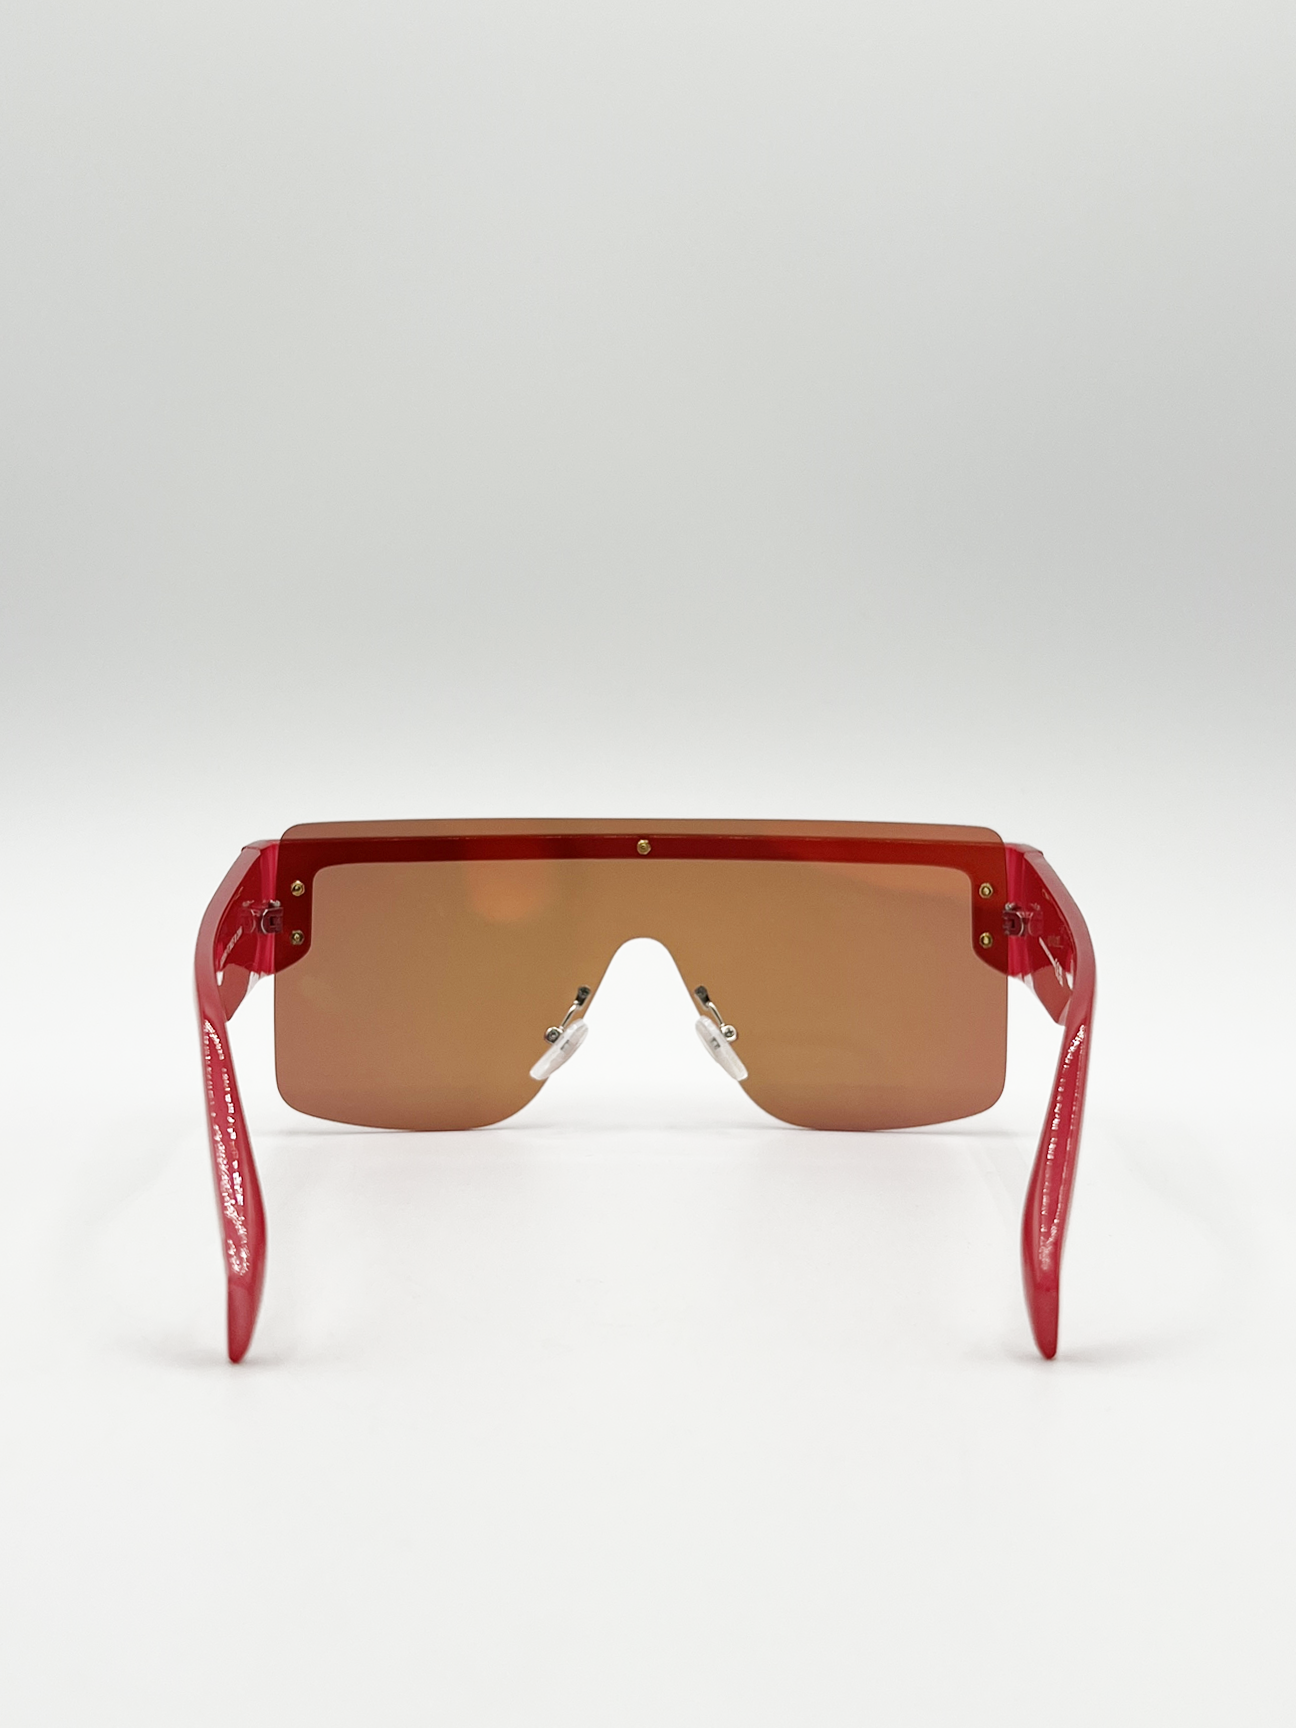 Oversized Flat Top Sunglasses with Mirrored Lens